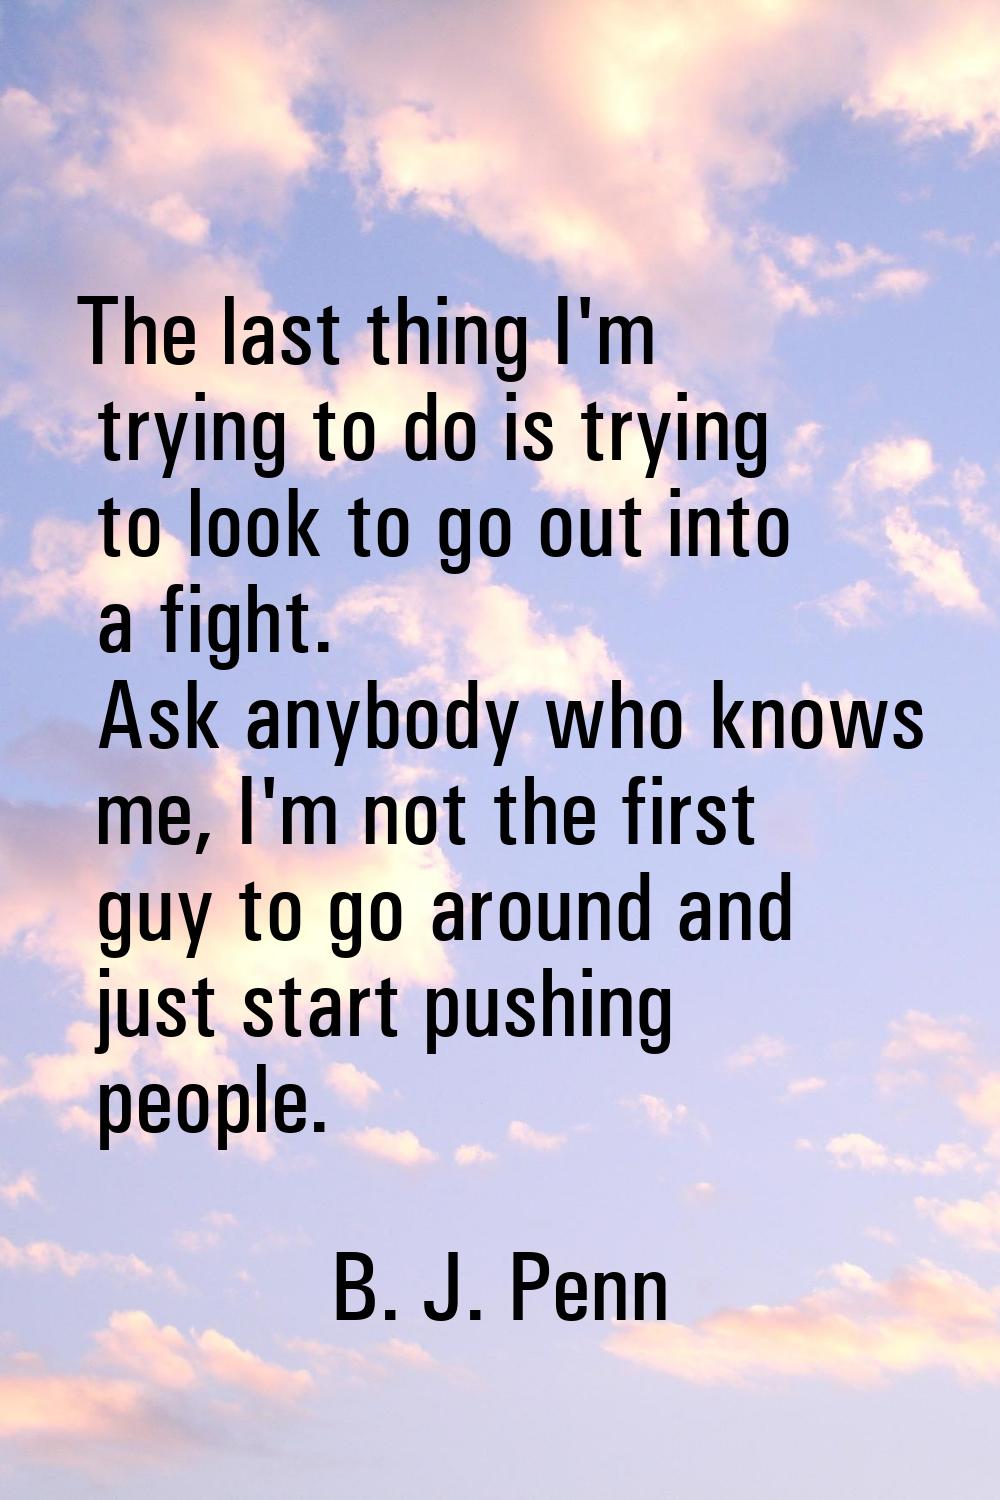 The last thing I'm trying to do is trying to look to go out into a fight. Ask anybody who knows me,